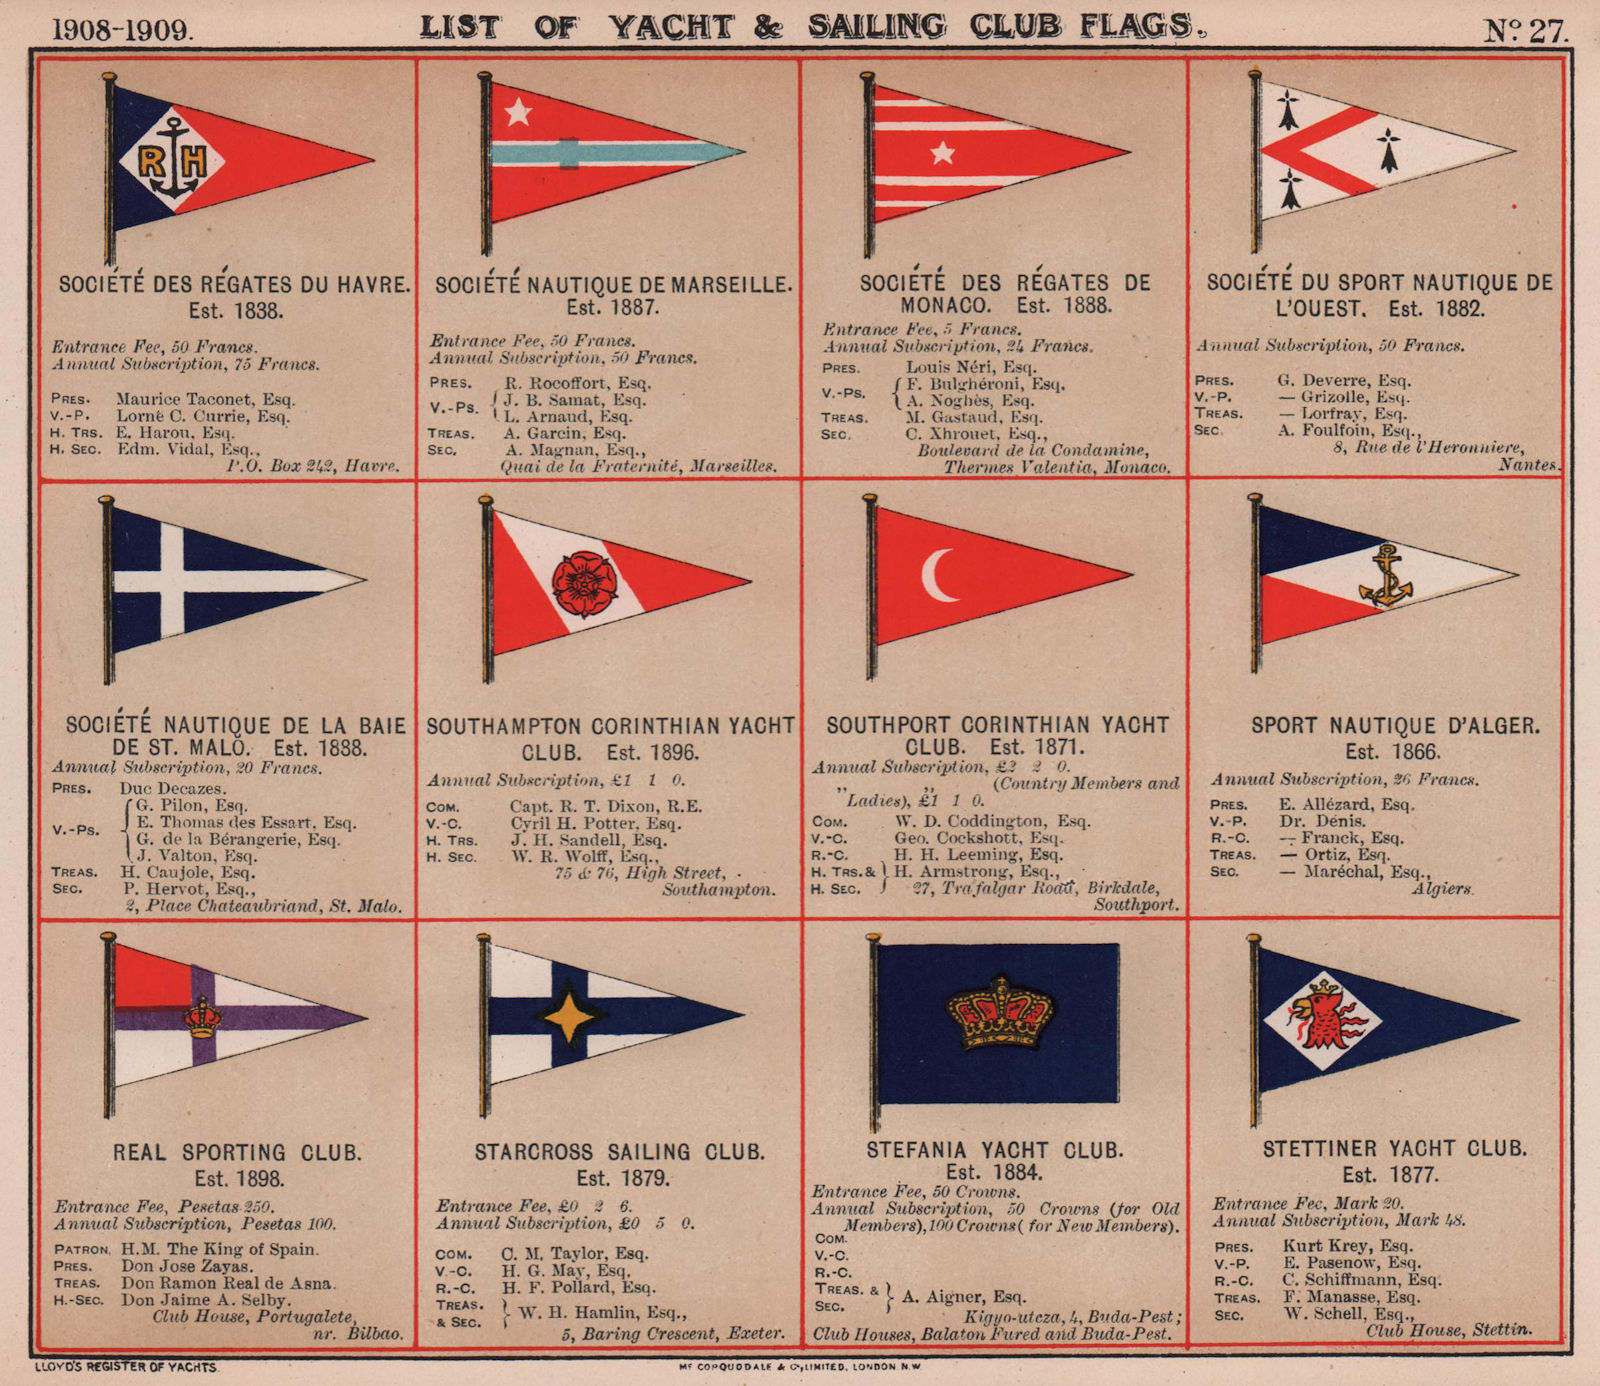 Associate Product YACHT & SAILING CLUB FLAGS S Havre Marseille Monaco St Malo Southport 1908